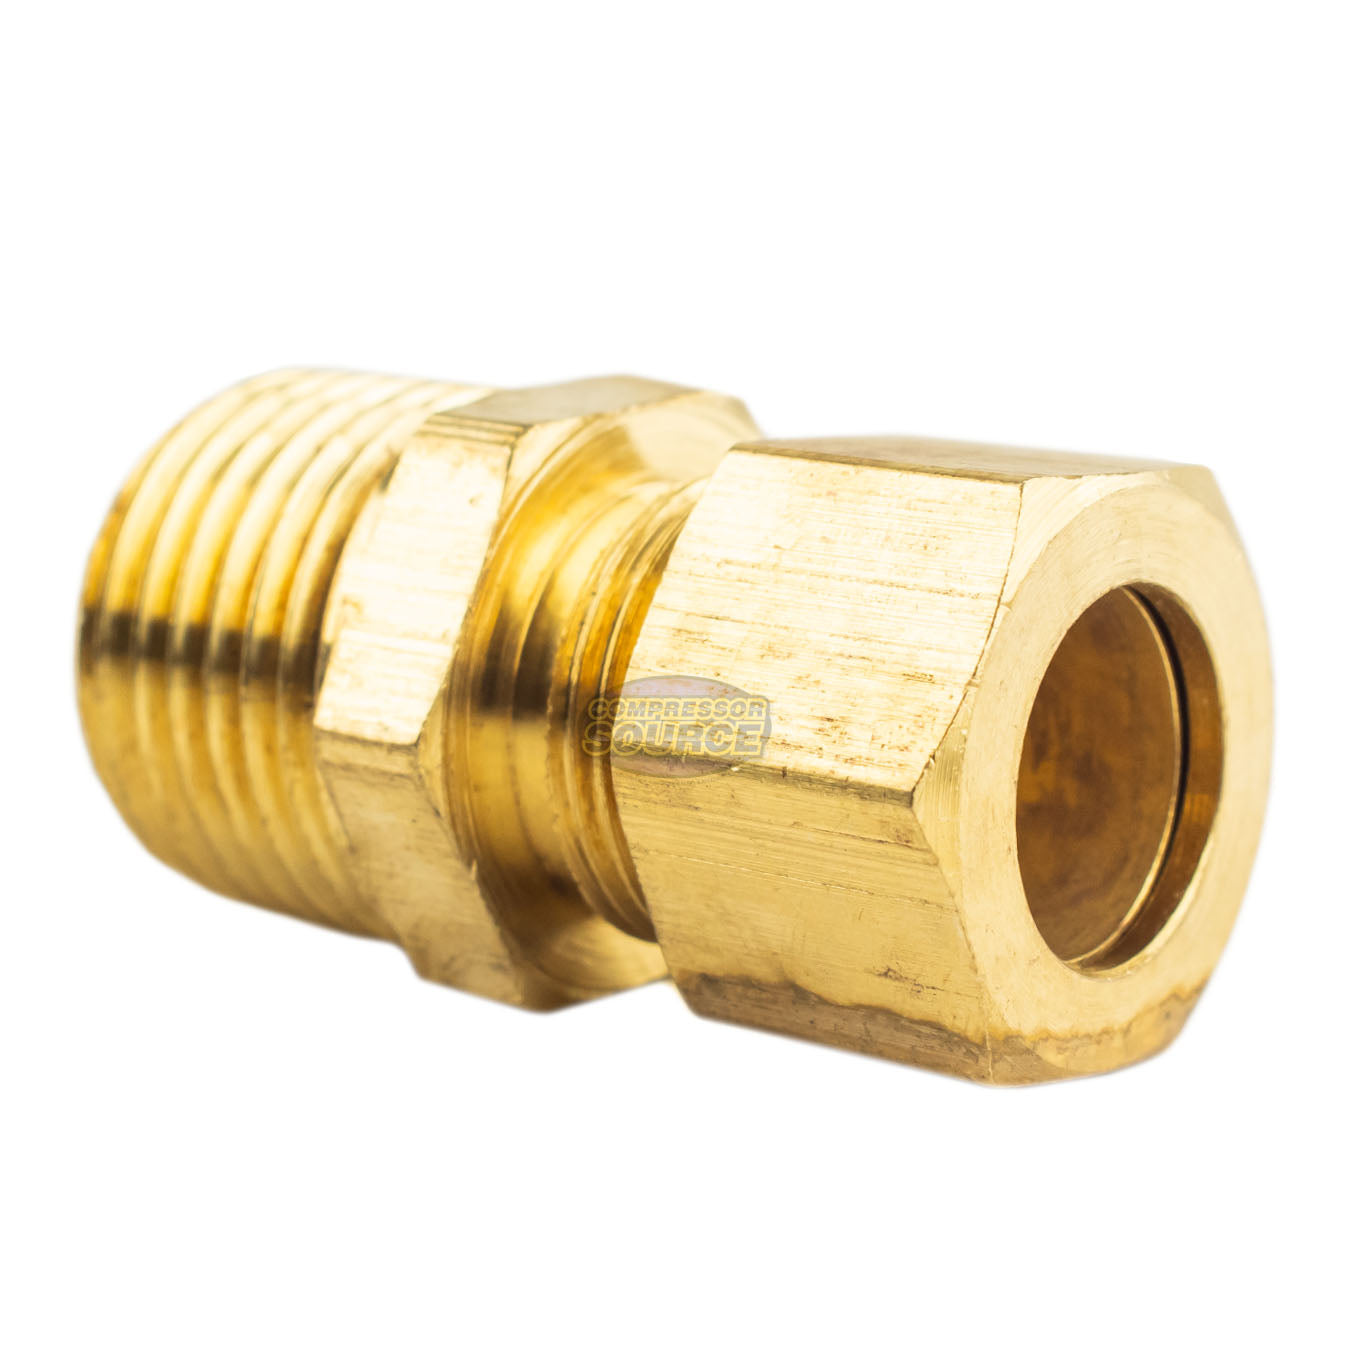 5 Pack 1/2" x 1/2" Male NPT Connector Brass Compression Fitting for 1/2" OD Tube